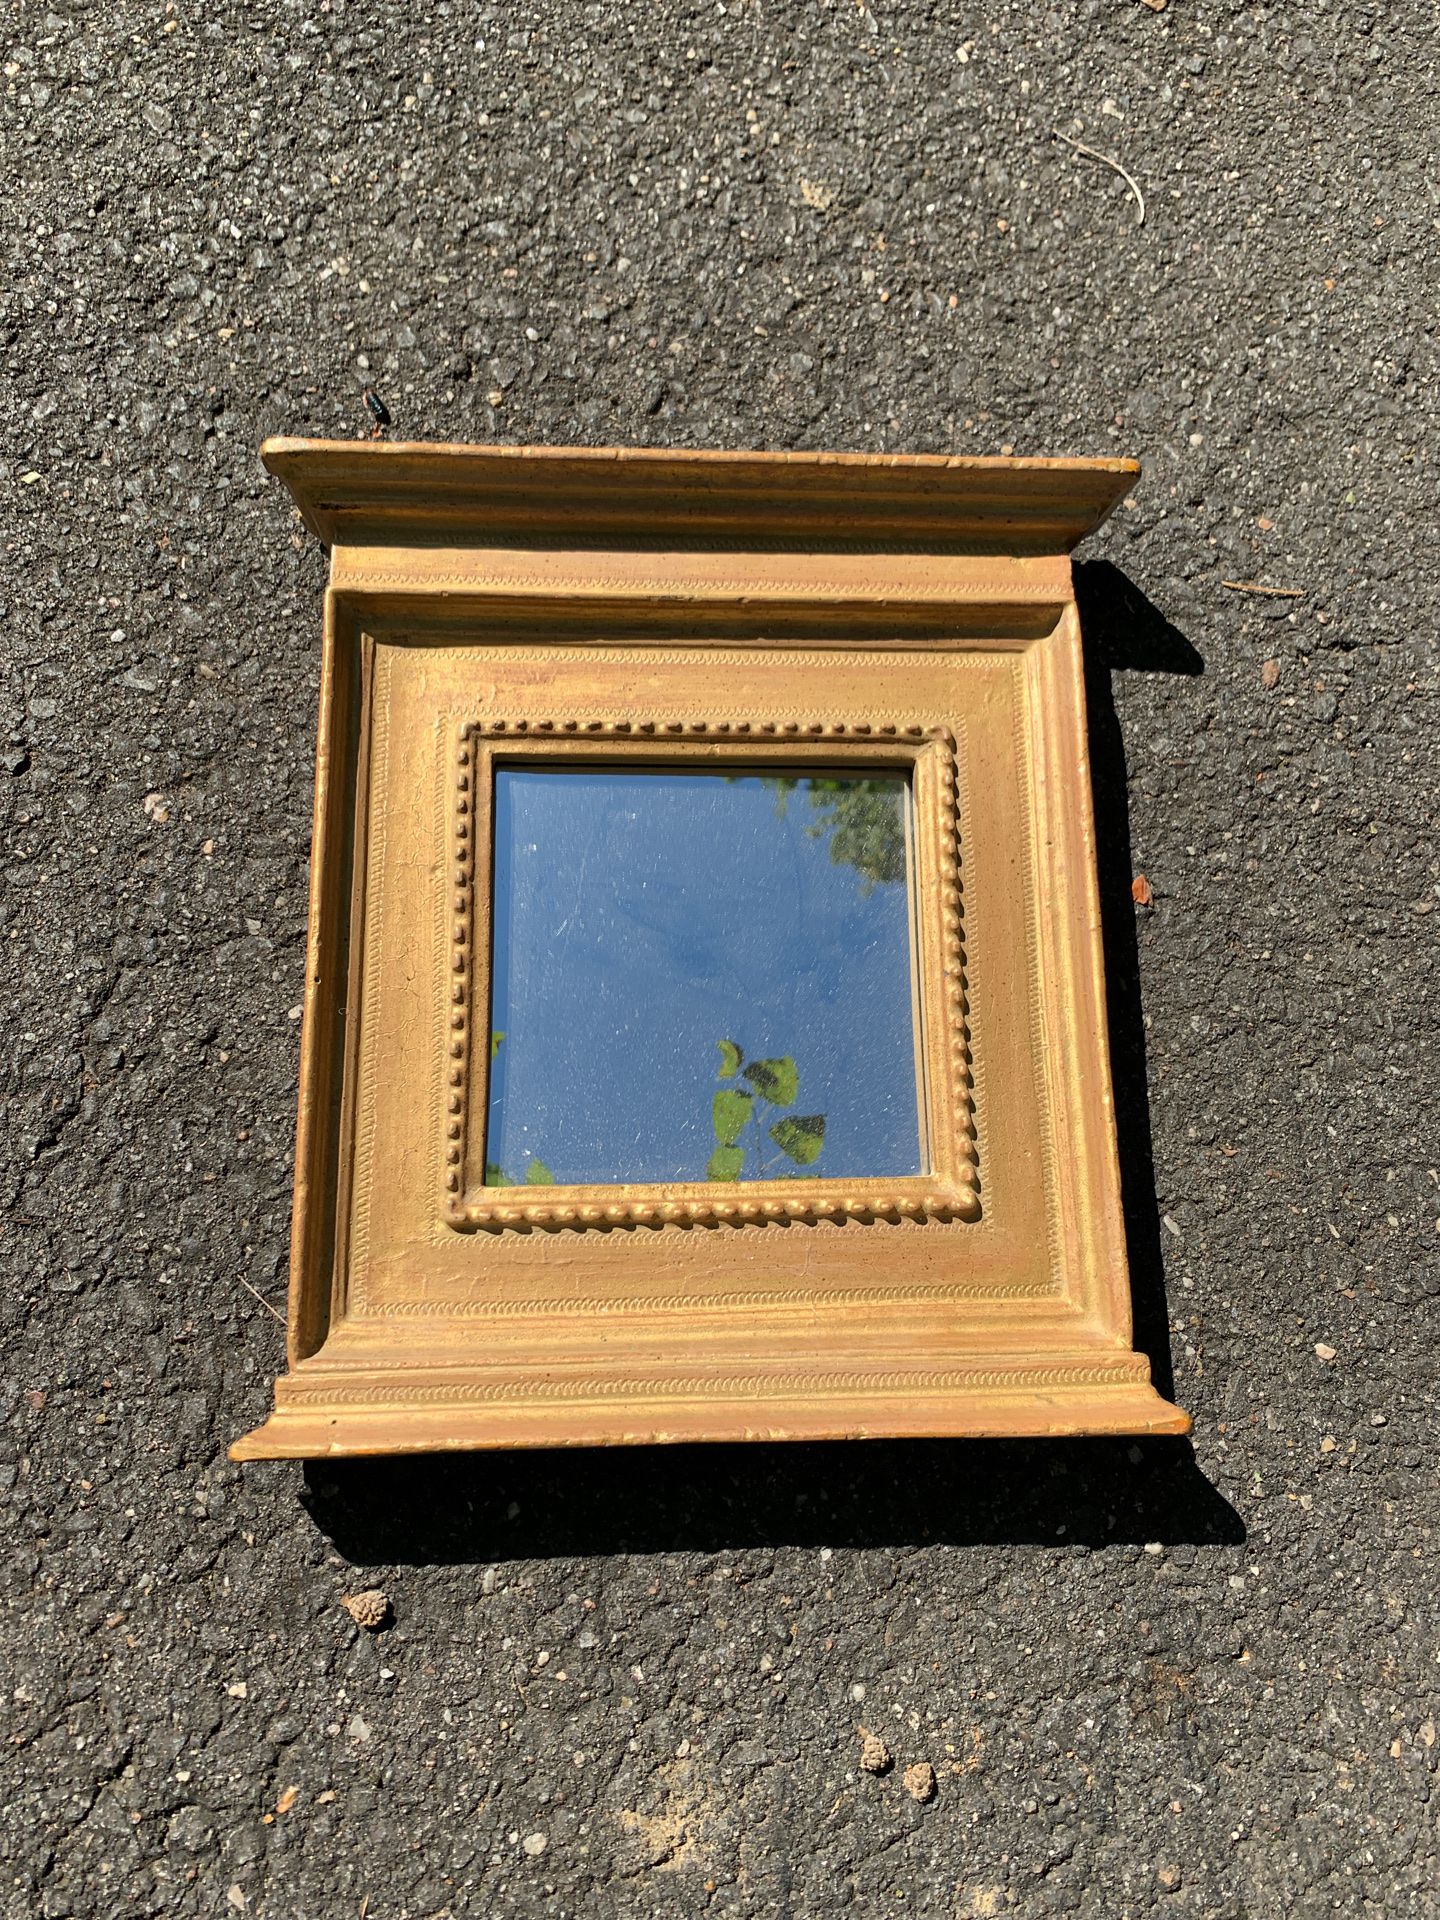 Small “antique style” mirror